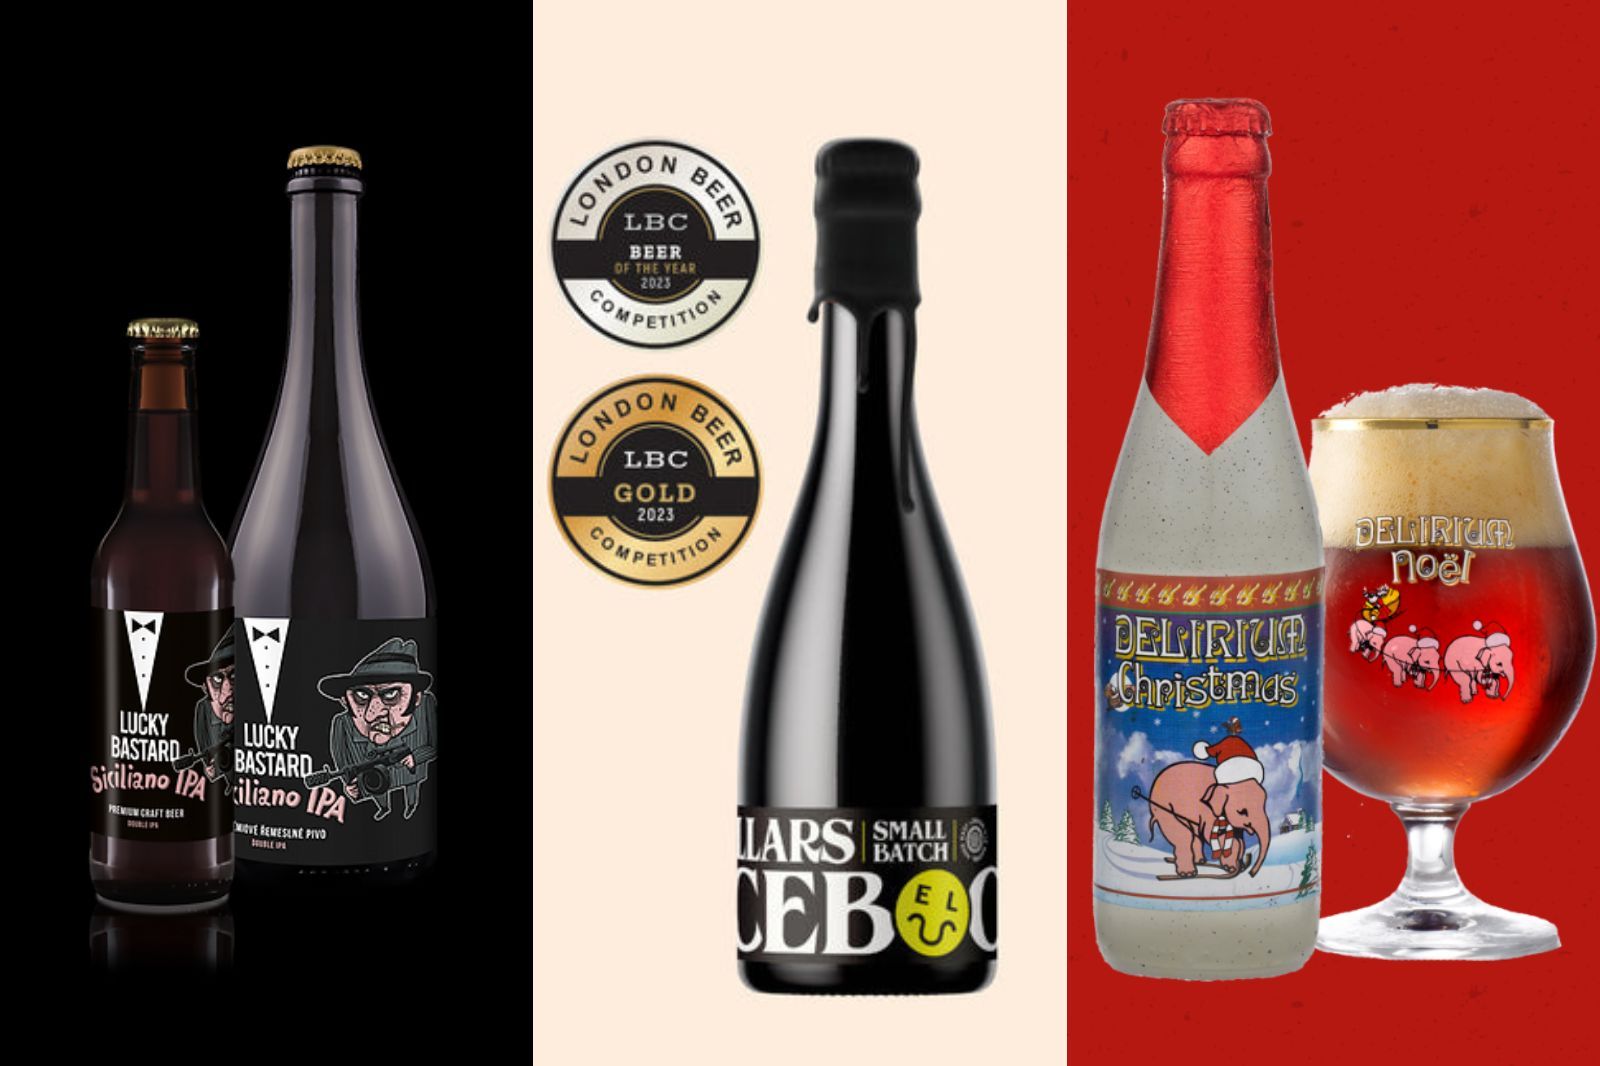 Photo for: Are the Best International Beers on your shelves yet?